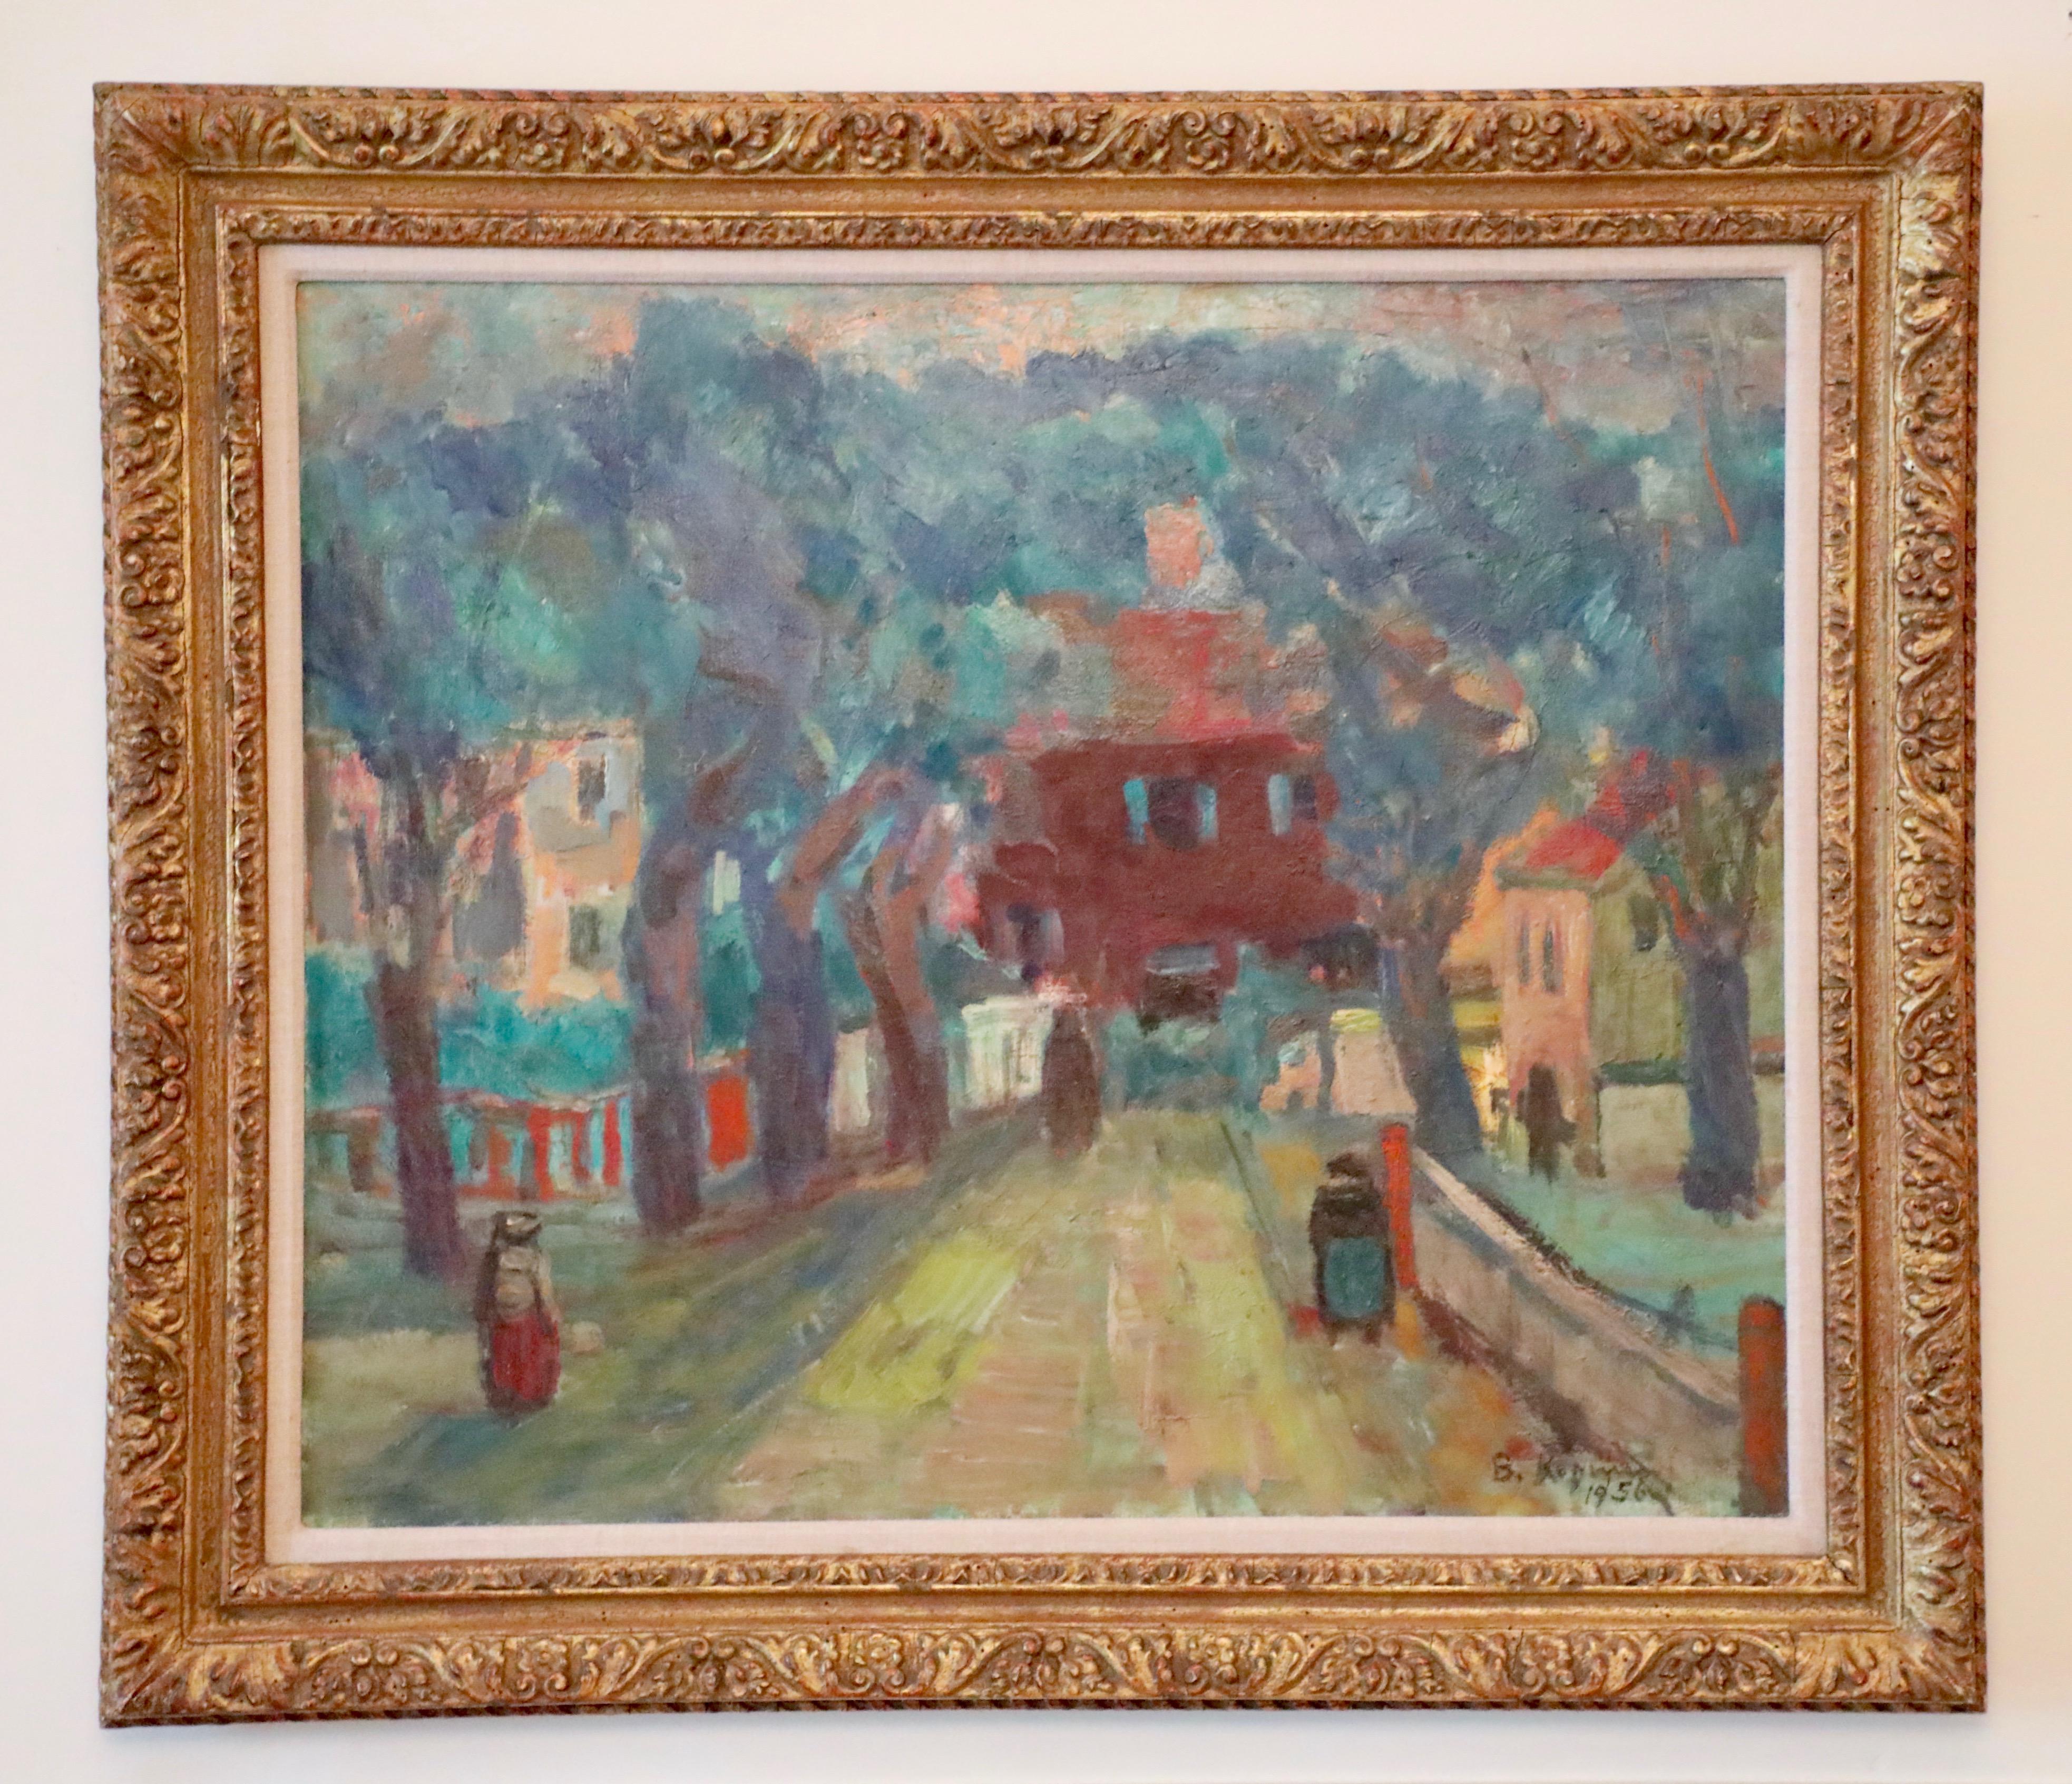 This is a large impressionistic street scene of Far Rockaway, Queens rendered in deep, vivid colors in an oil on canvas by the artist Benjamin Kopman. This was purchased at auction from a decommissioning of works by the Amity Arts Foundation and is